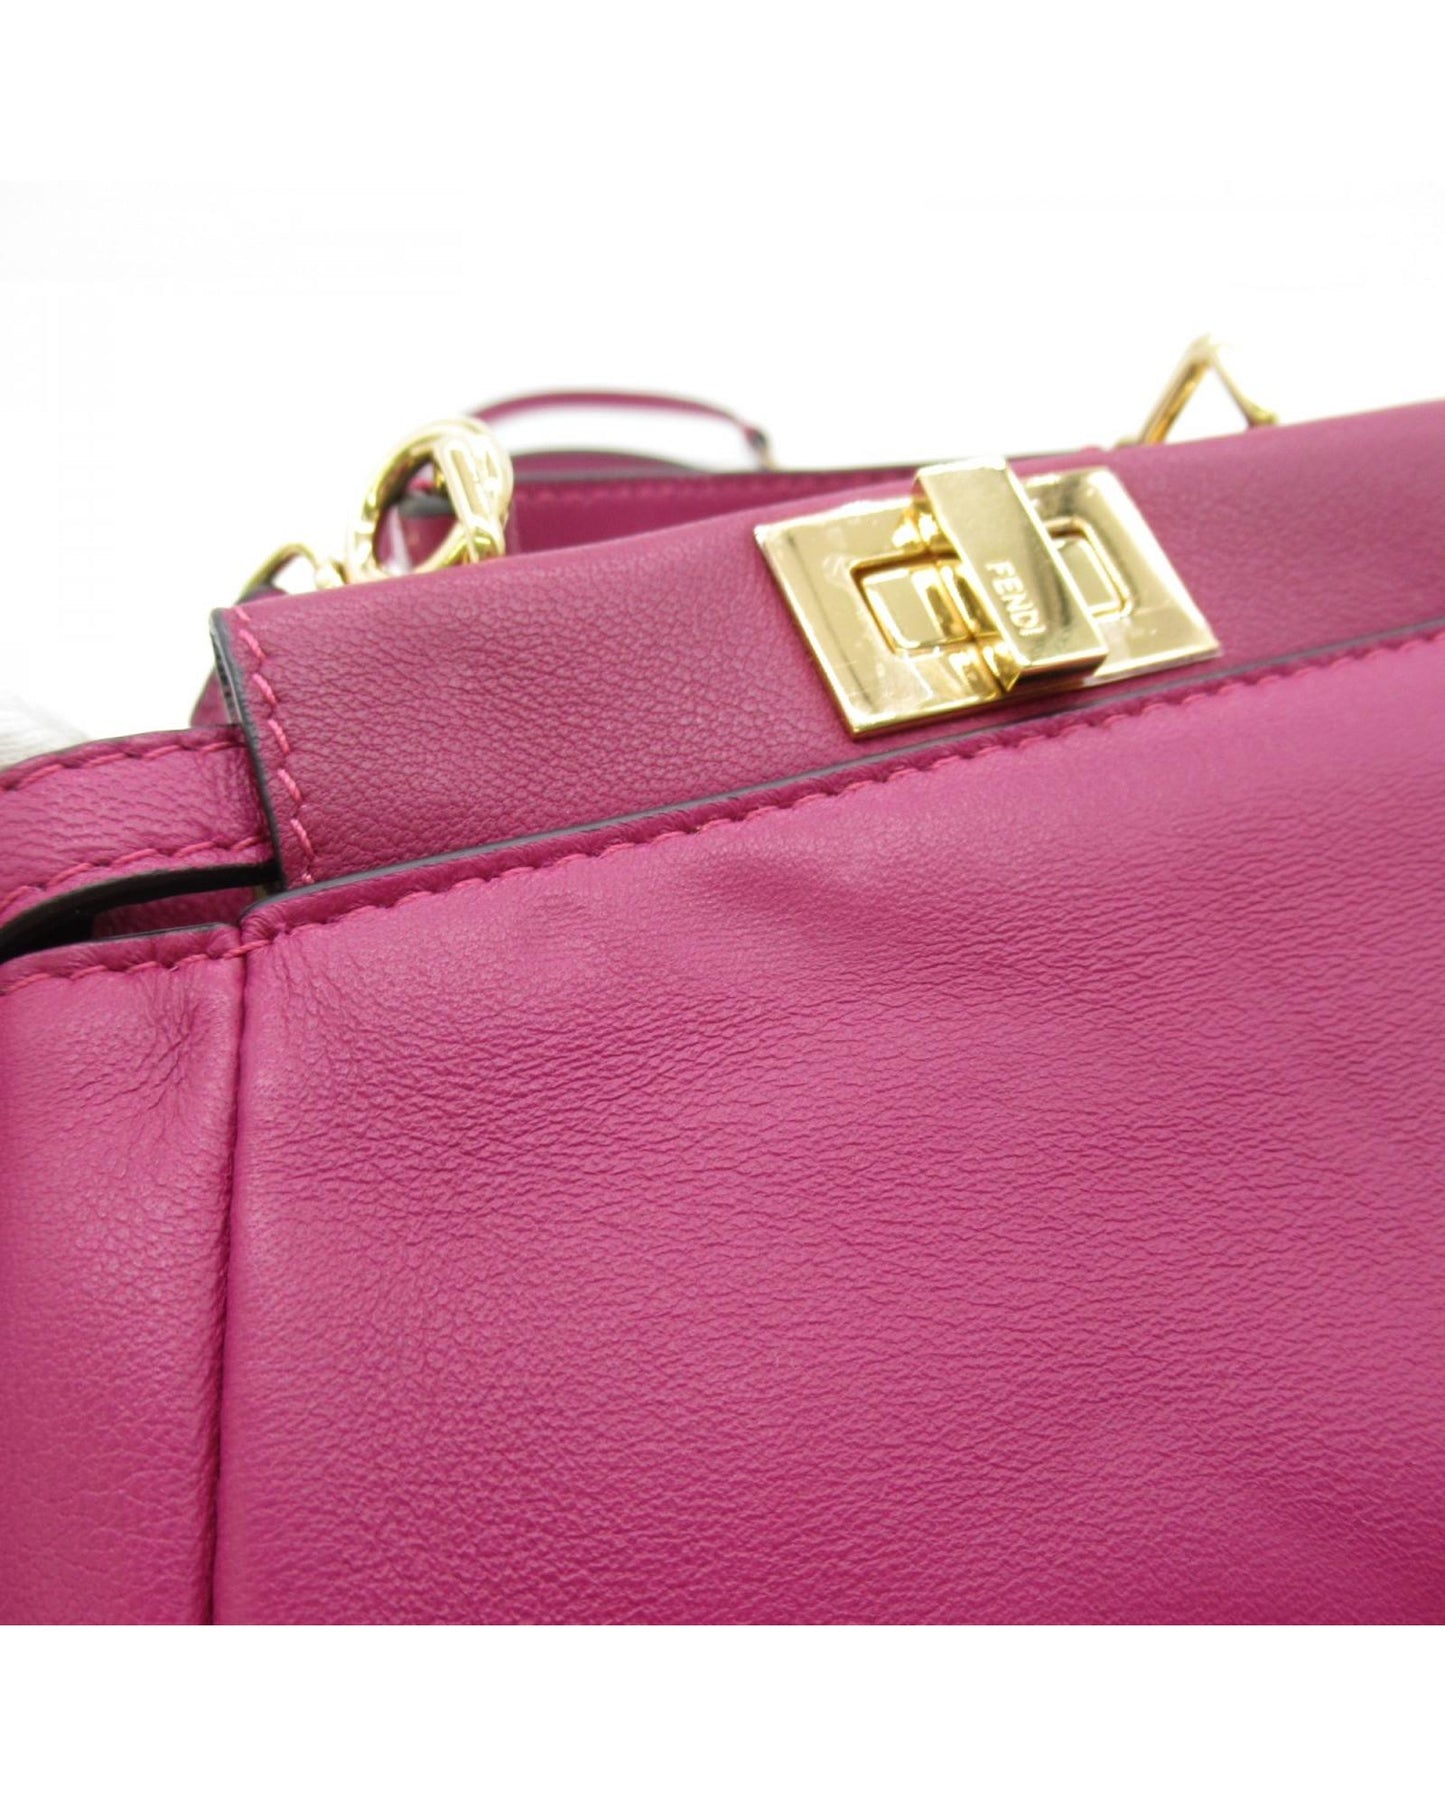 Fendi Women's Small Leather Crossbody Bag in Excellent Condition in Pink